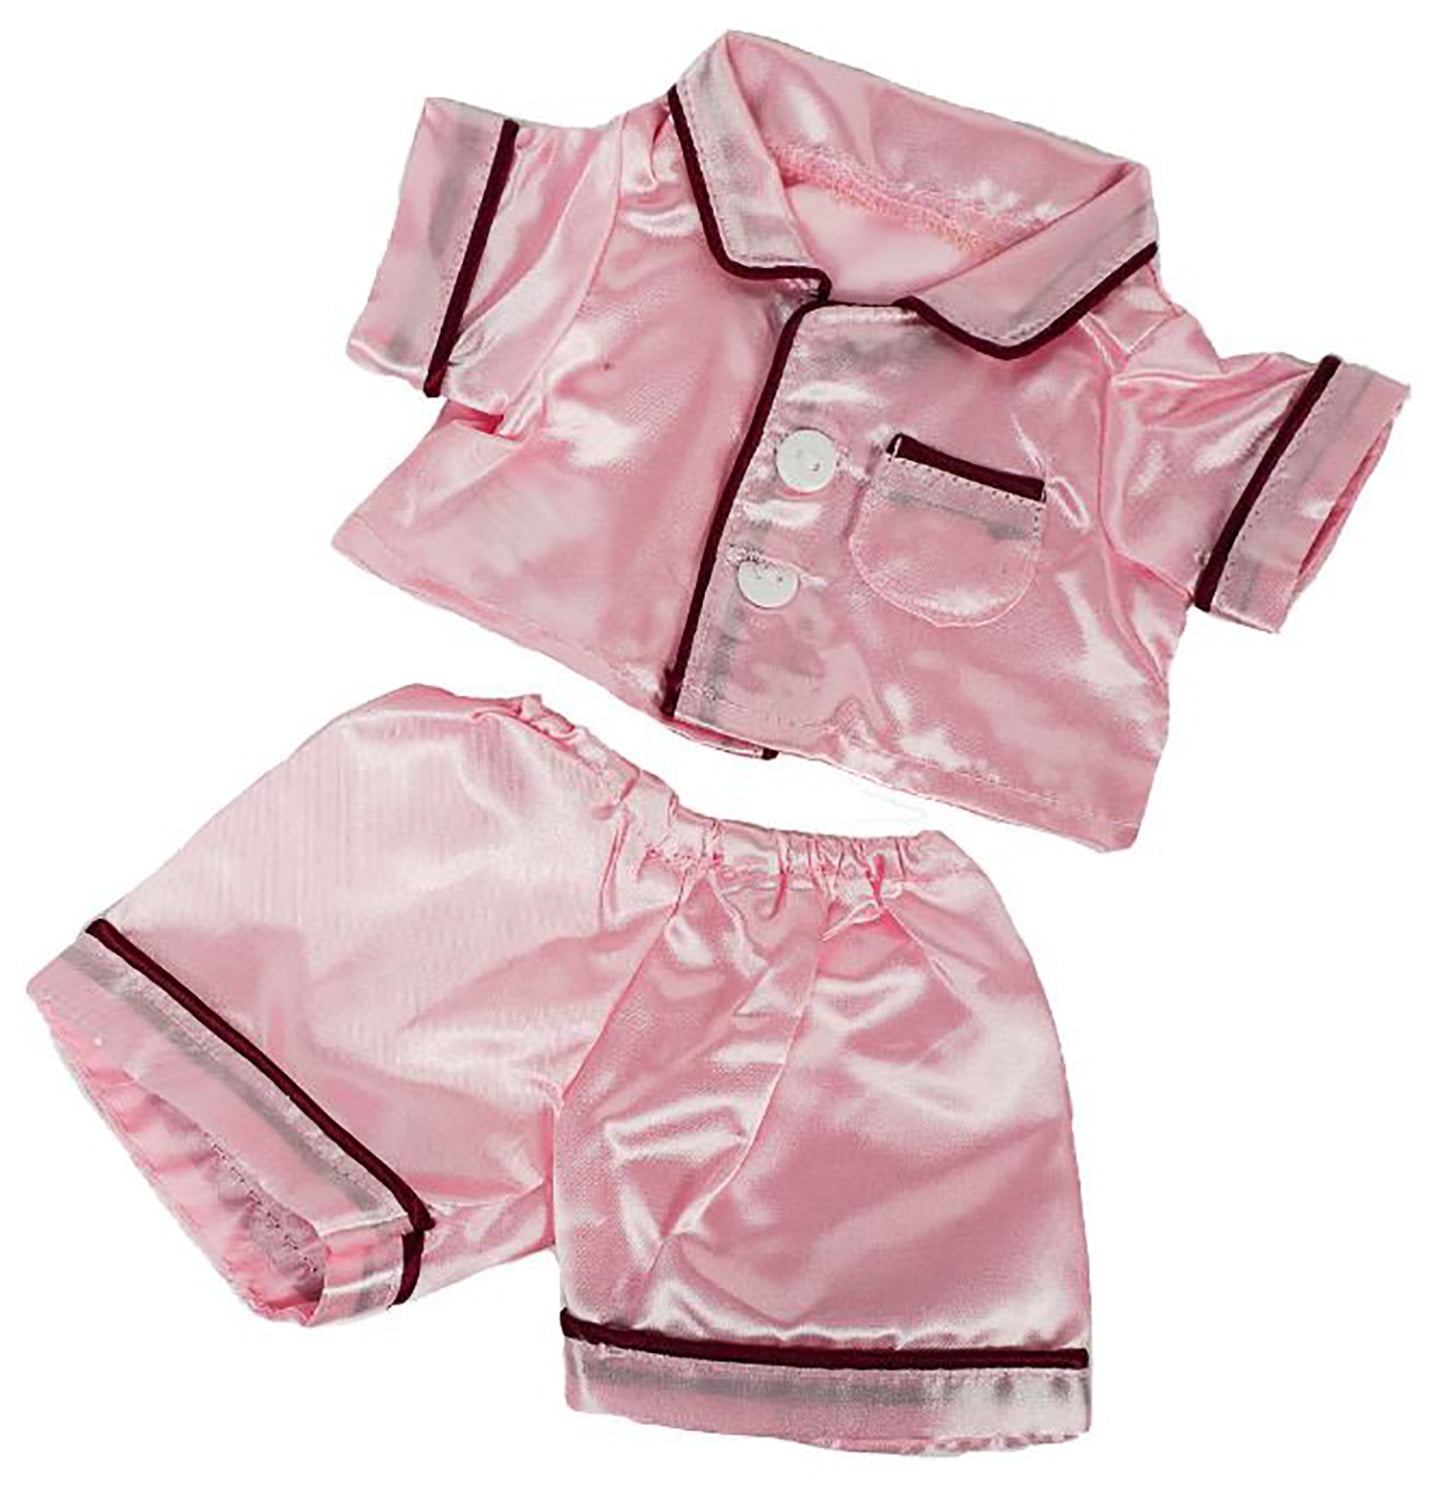 Fun Flannel Pajamas Outfit Teddy Bear Clothes Fit 8 inch to 10 inch Build-a-bear 